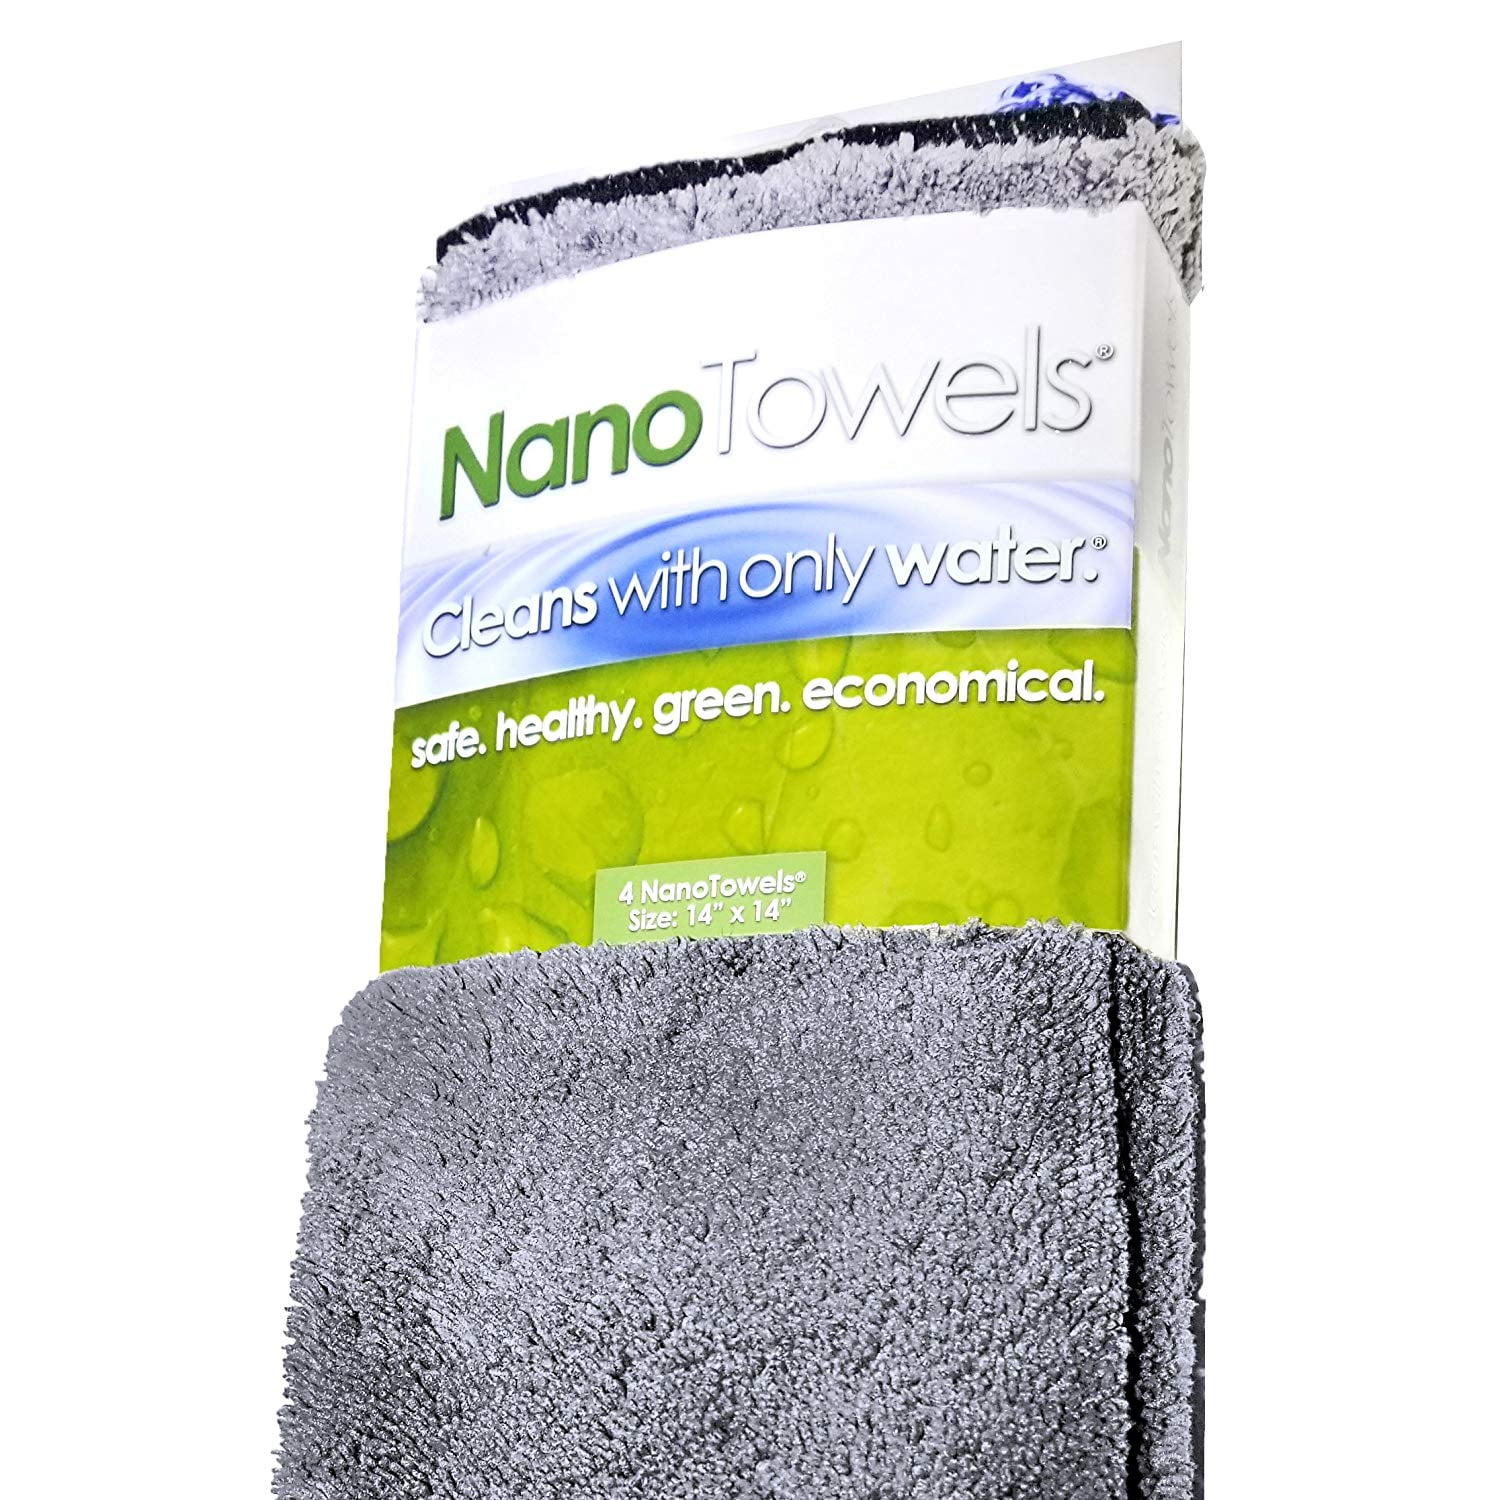 Clean Faster & Easier and Make Your Home Safer & Healthier 4 Ct Nano Towels Amazing Eco Fabric That Cleans Virtually Any Surface With Only Water Save Money No More Paper Towels Or Toxic Chemicals